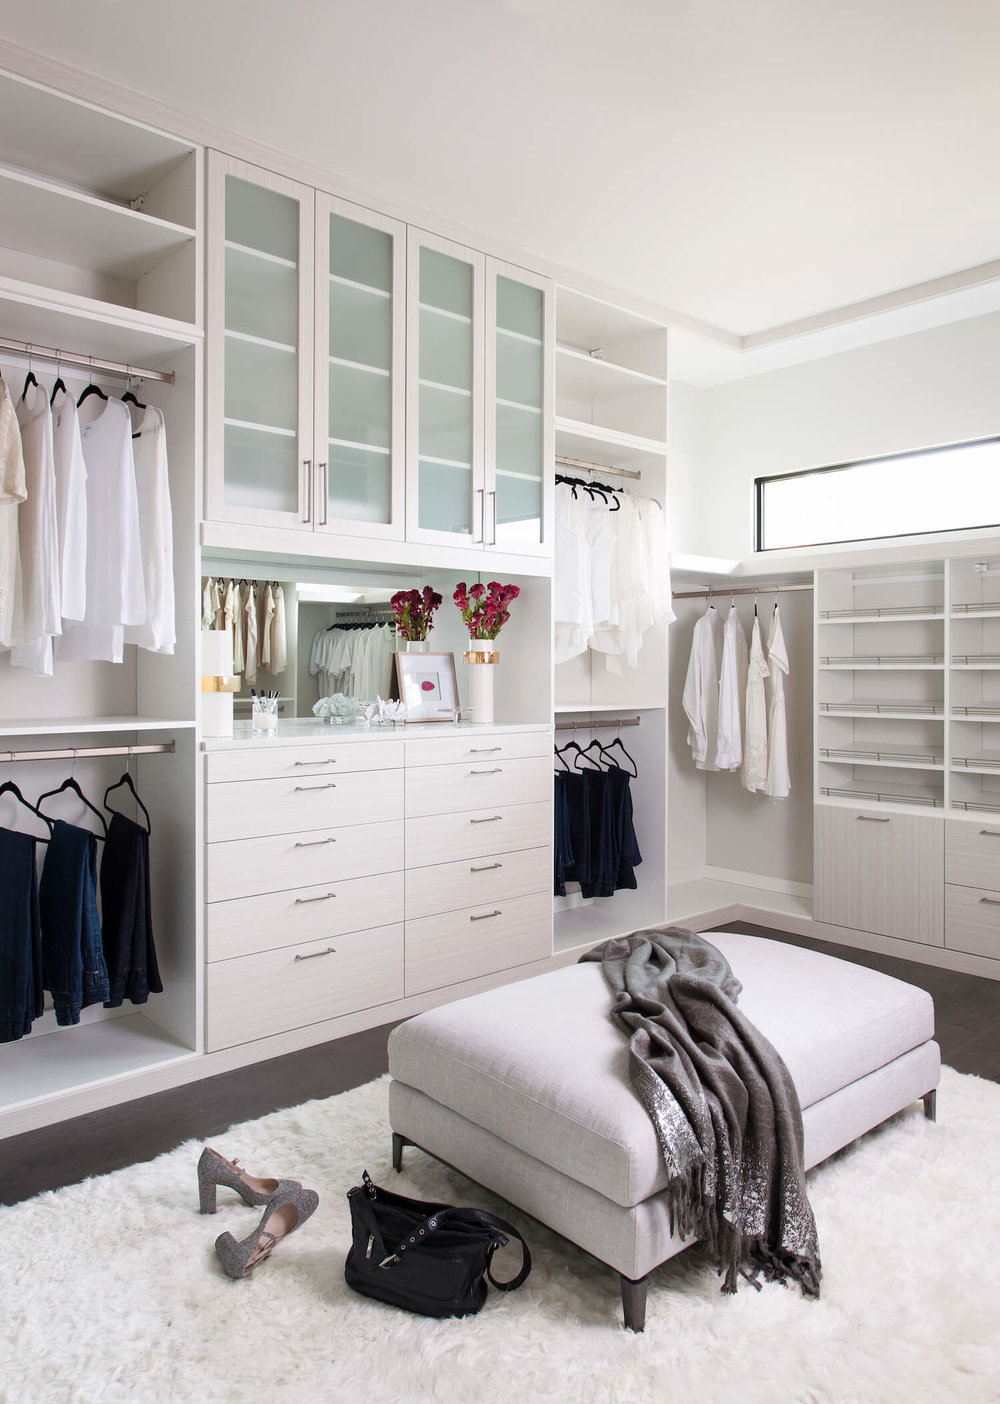 wc4 Cool walk-in closet ideas you should have in your home